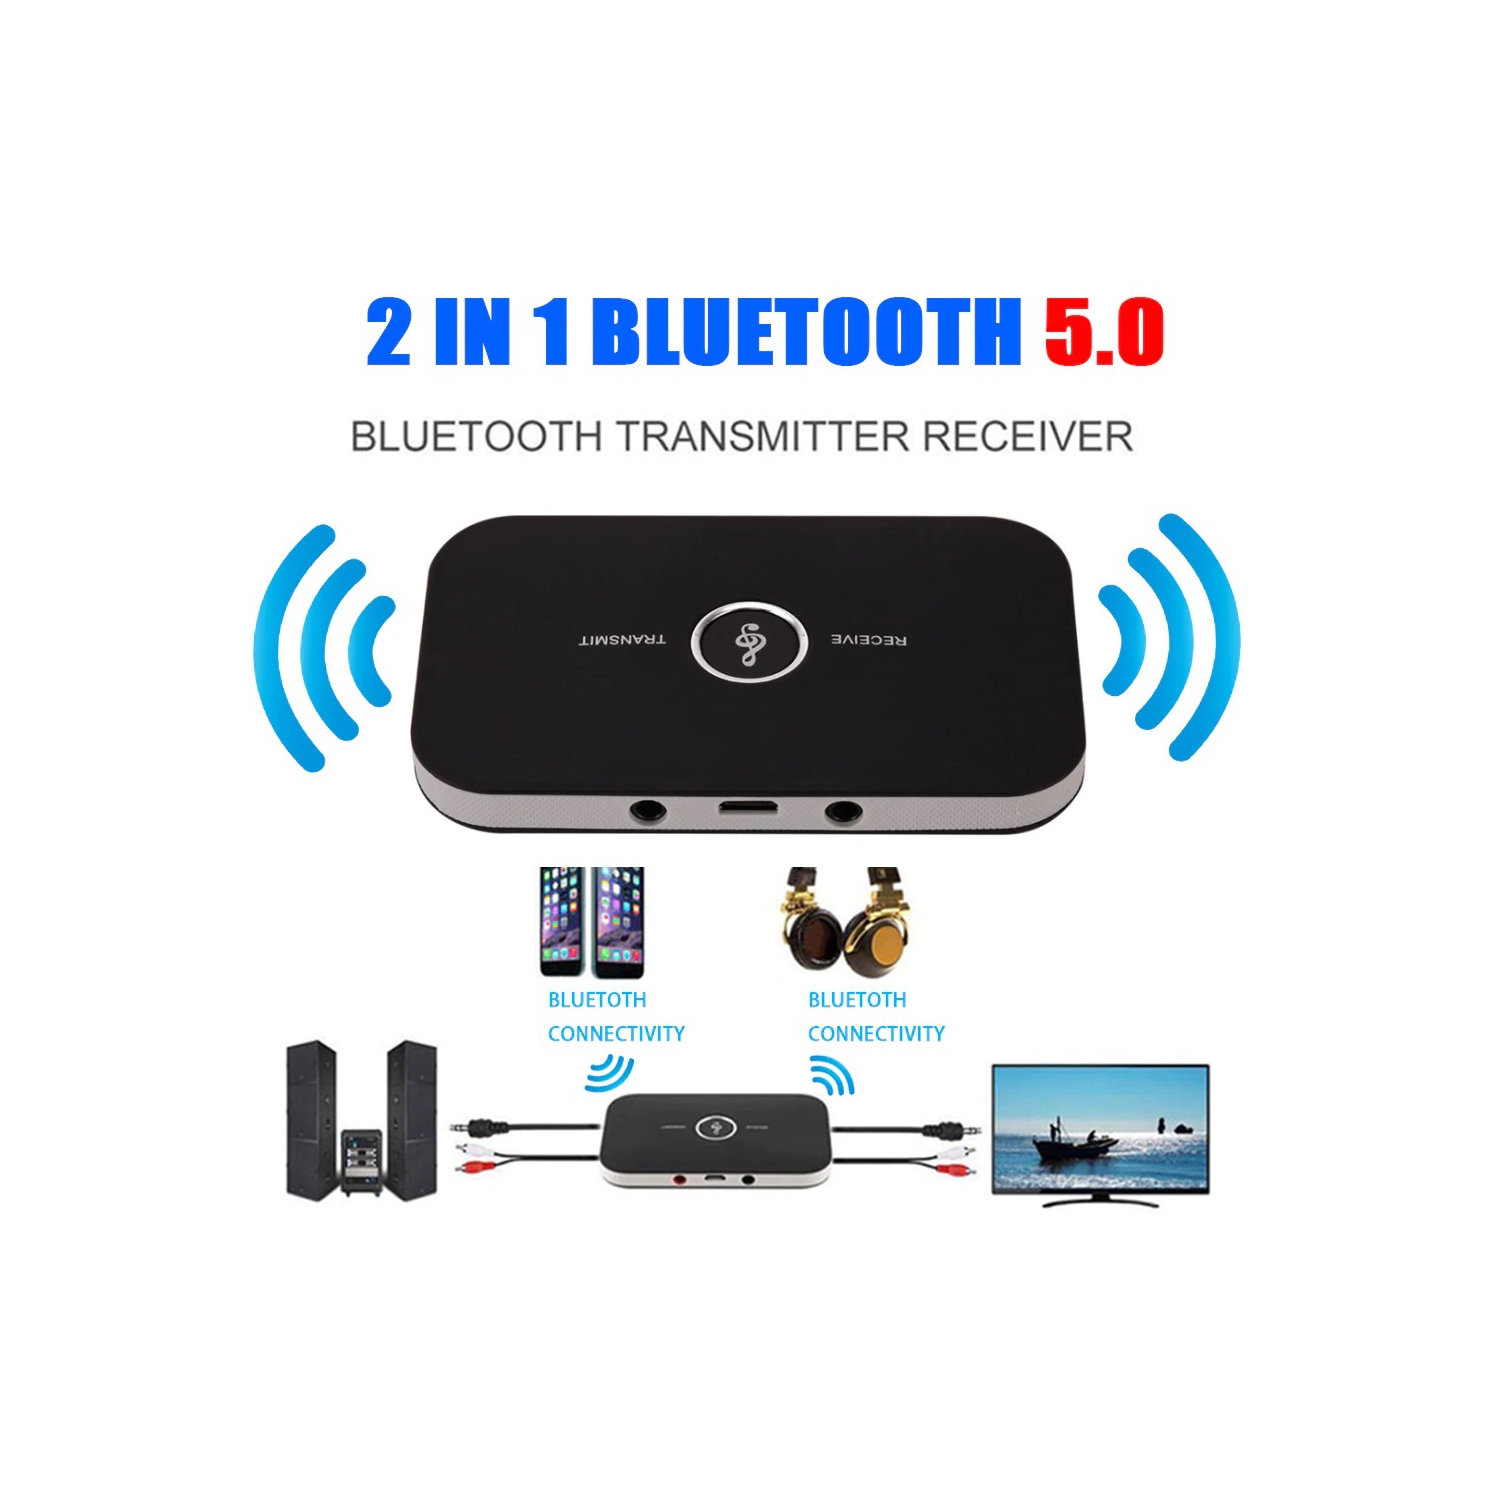 2 in 1 Bluetooth 5.0 Transmitter Receiver Wireless Audio Adapter For PC TV Headphone Car 3.5mm 3.5 AUX Music Receiver Sender